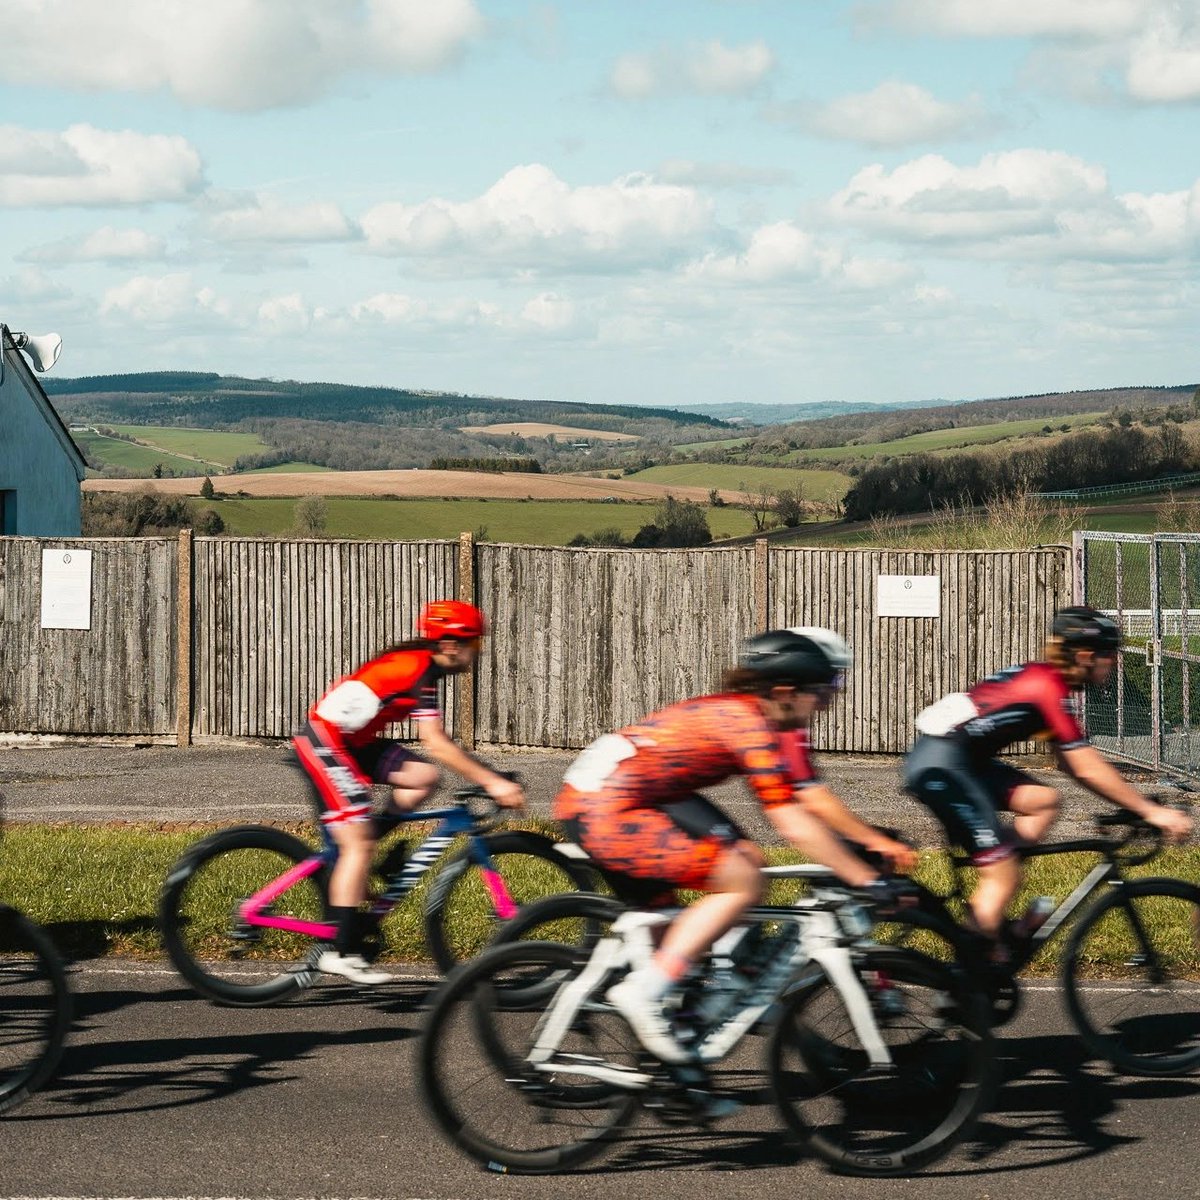 Impressions of the RCR Fat Creations Goodwood Road Race by 📸 Tom Austin. Ft. @O_E_Hurdle @TomHeal10 @laurencyclist & Callum Slade #hellyeah